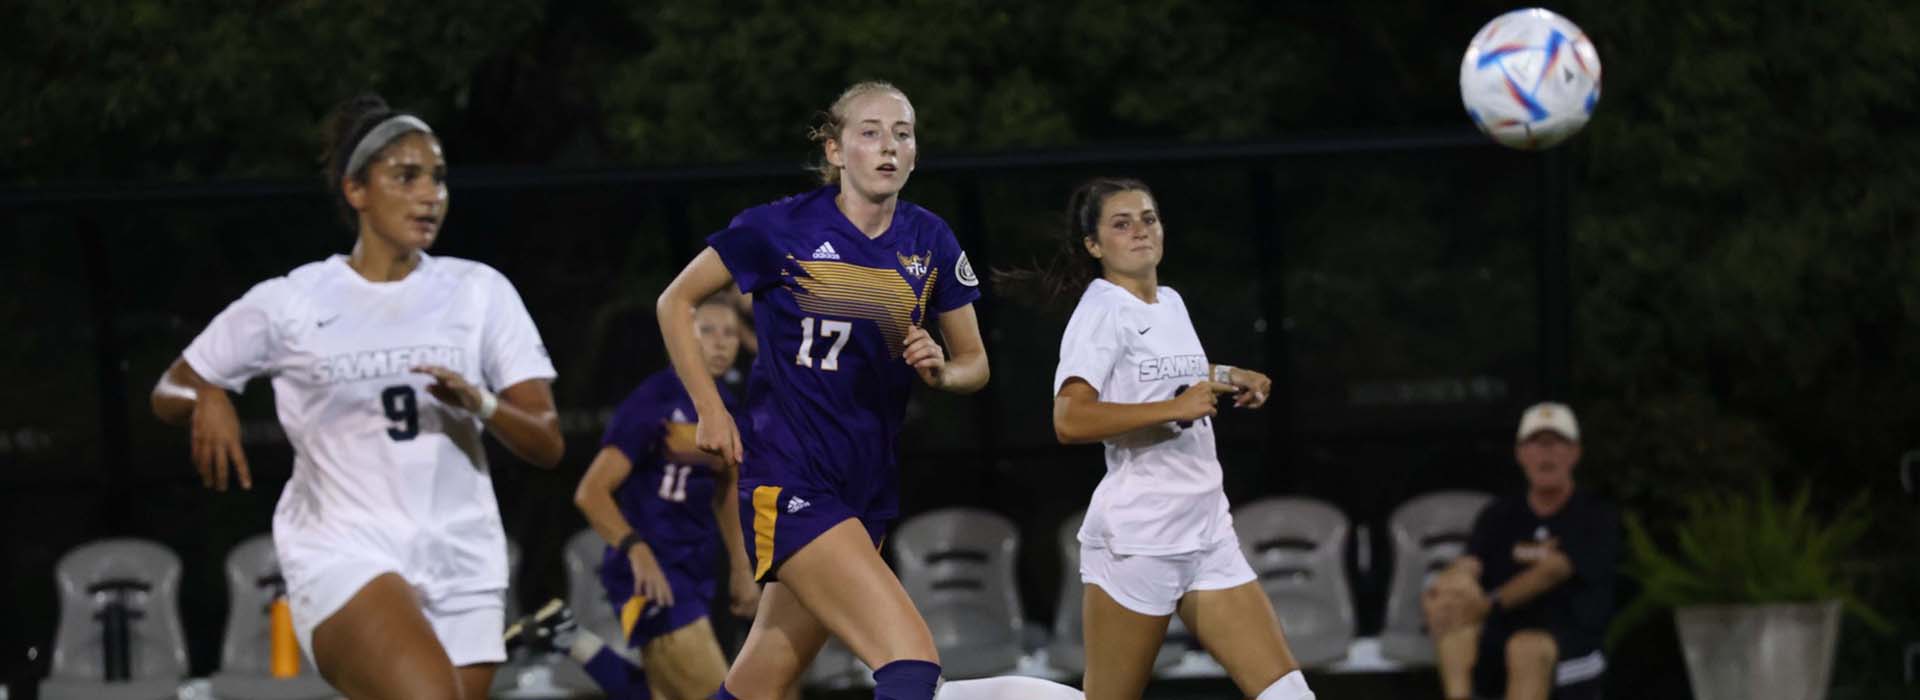 Golden Eagles head to Southern Indiana for second OVC match of season